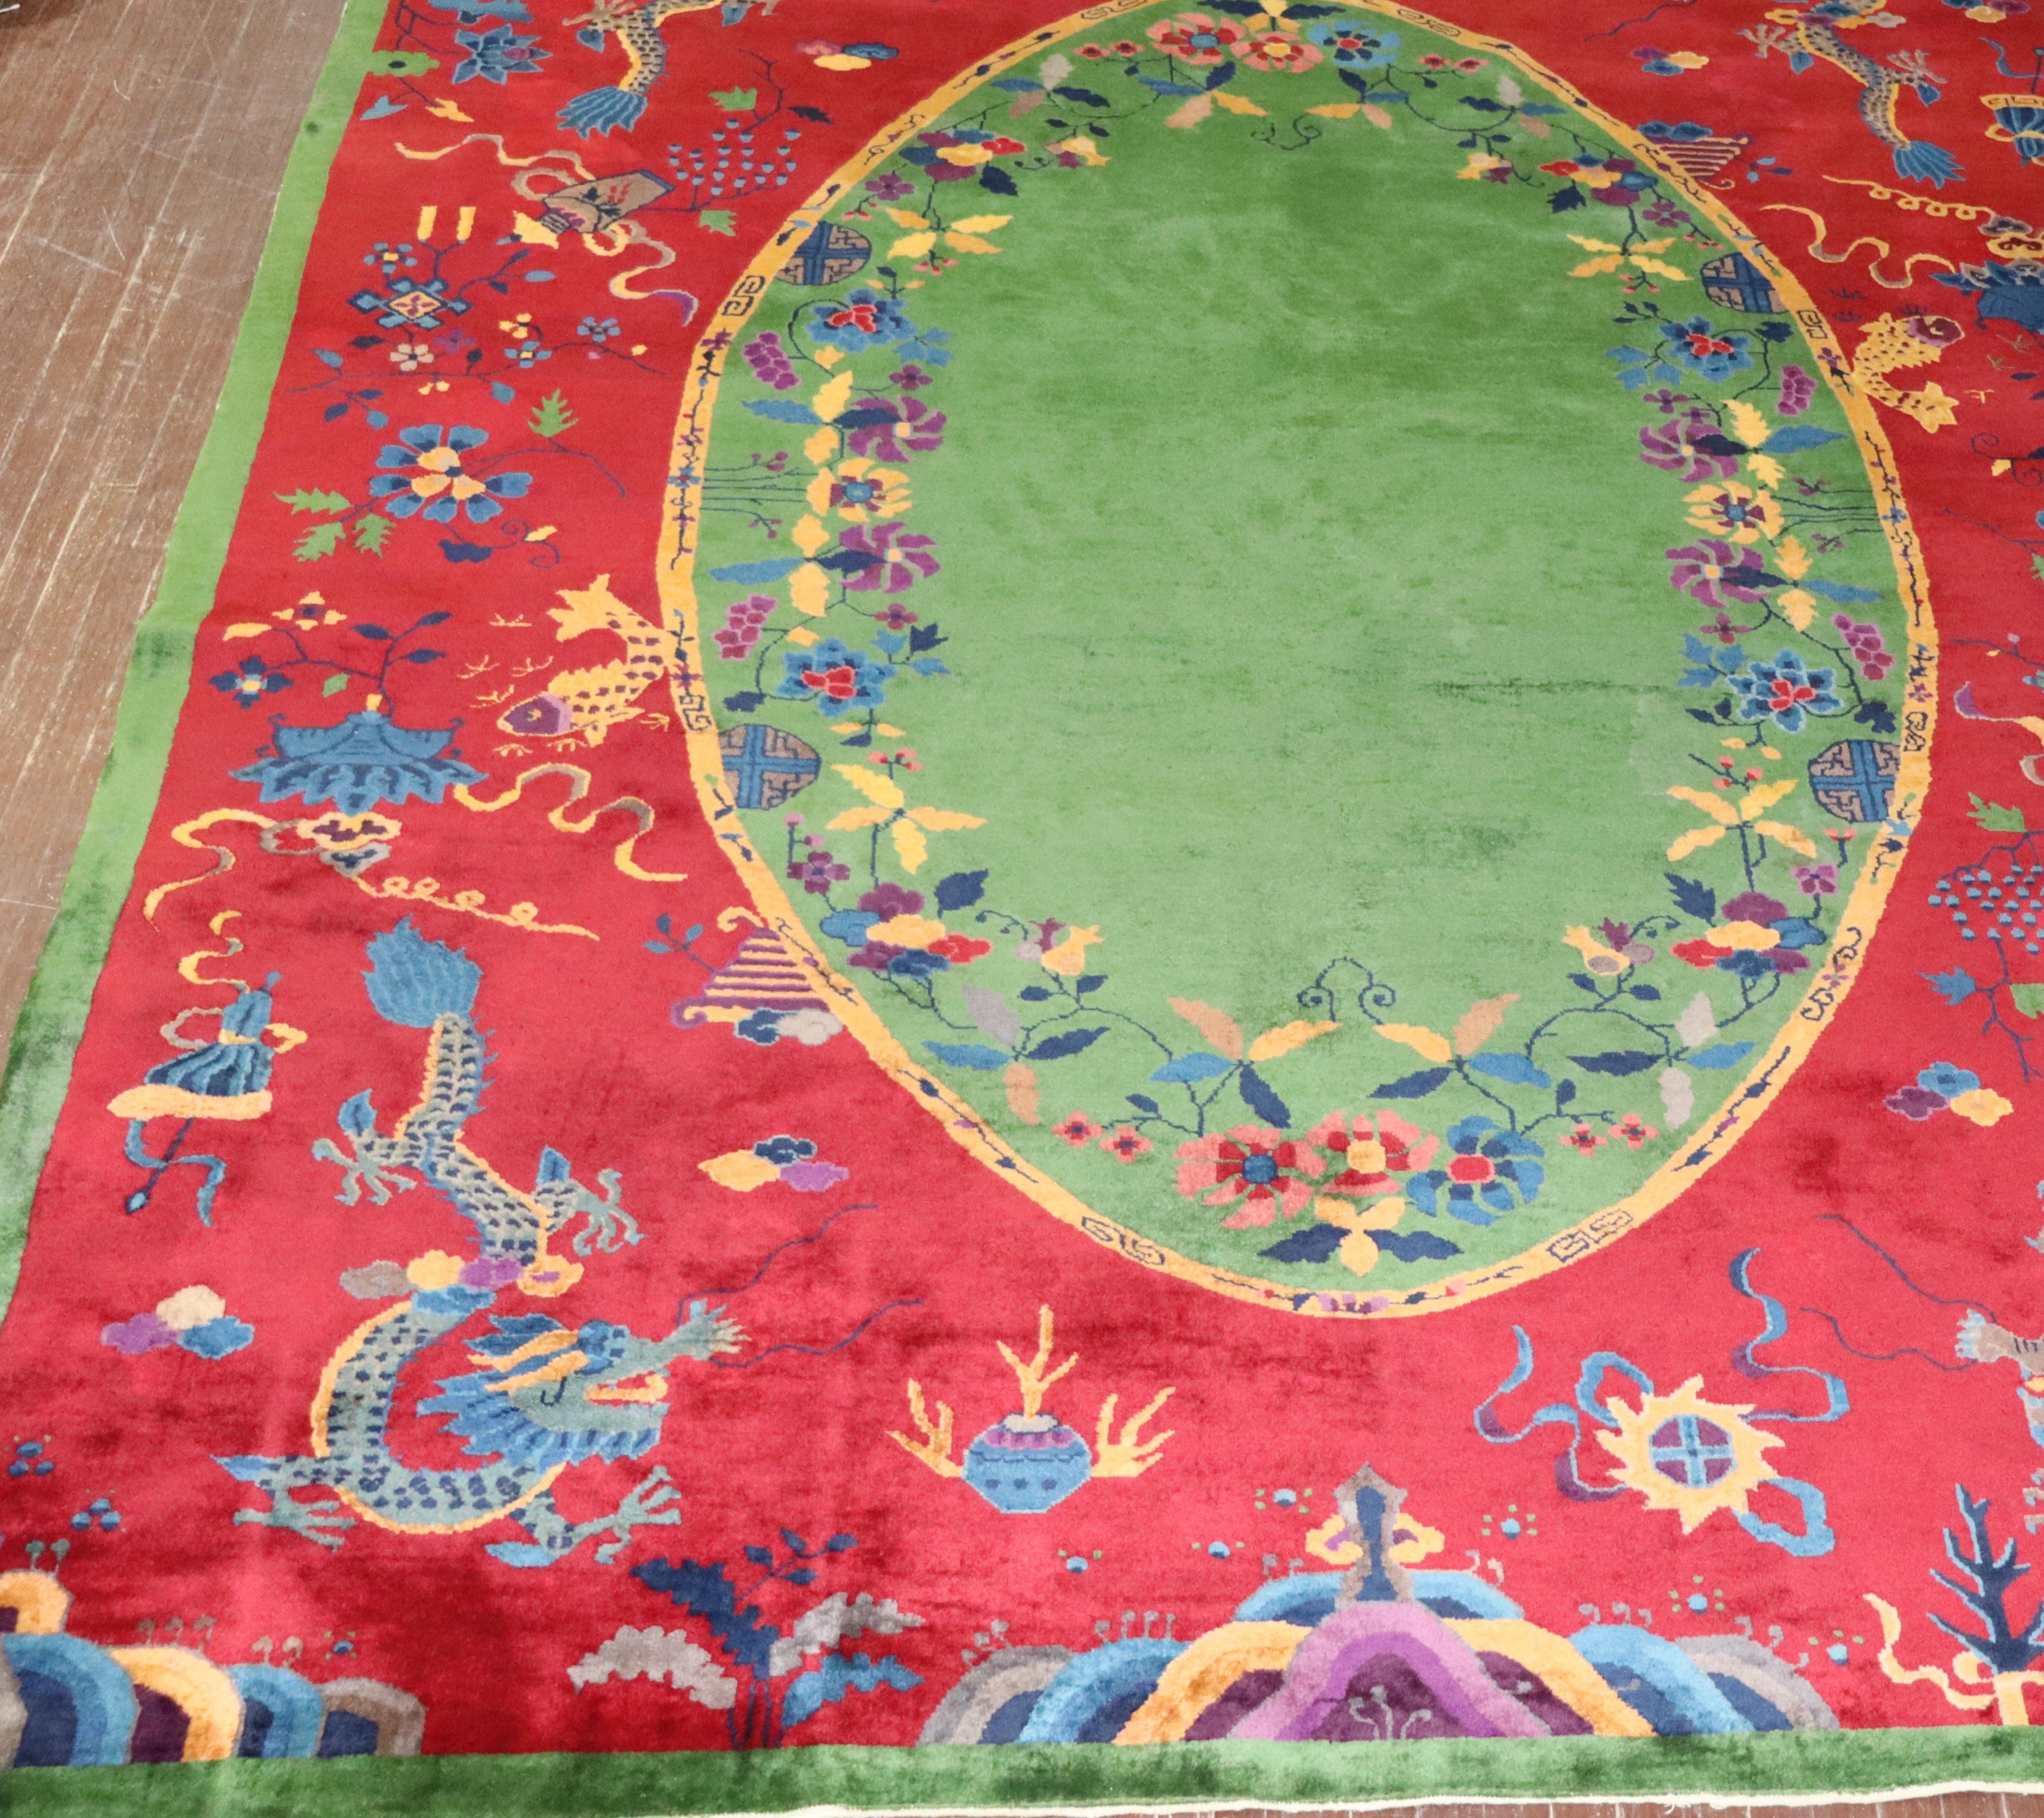 Antique Dragon Art Deco Chinese Carpet, Early 20th Century, 8'9